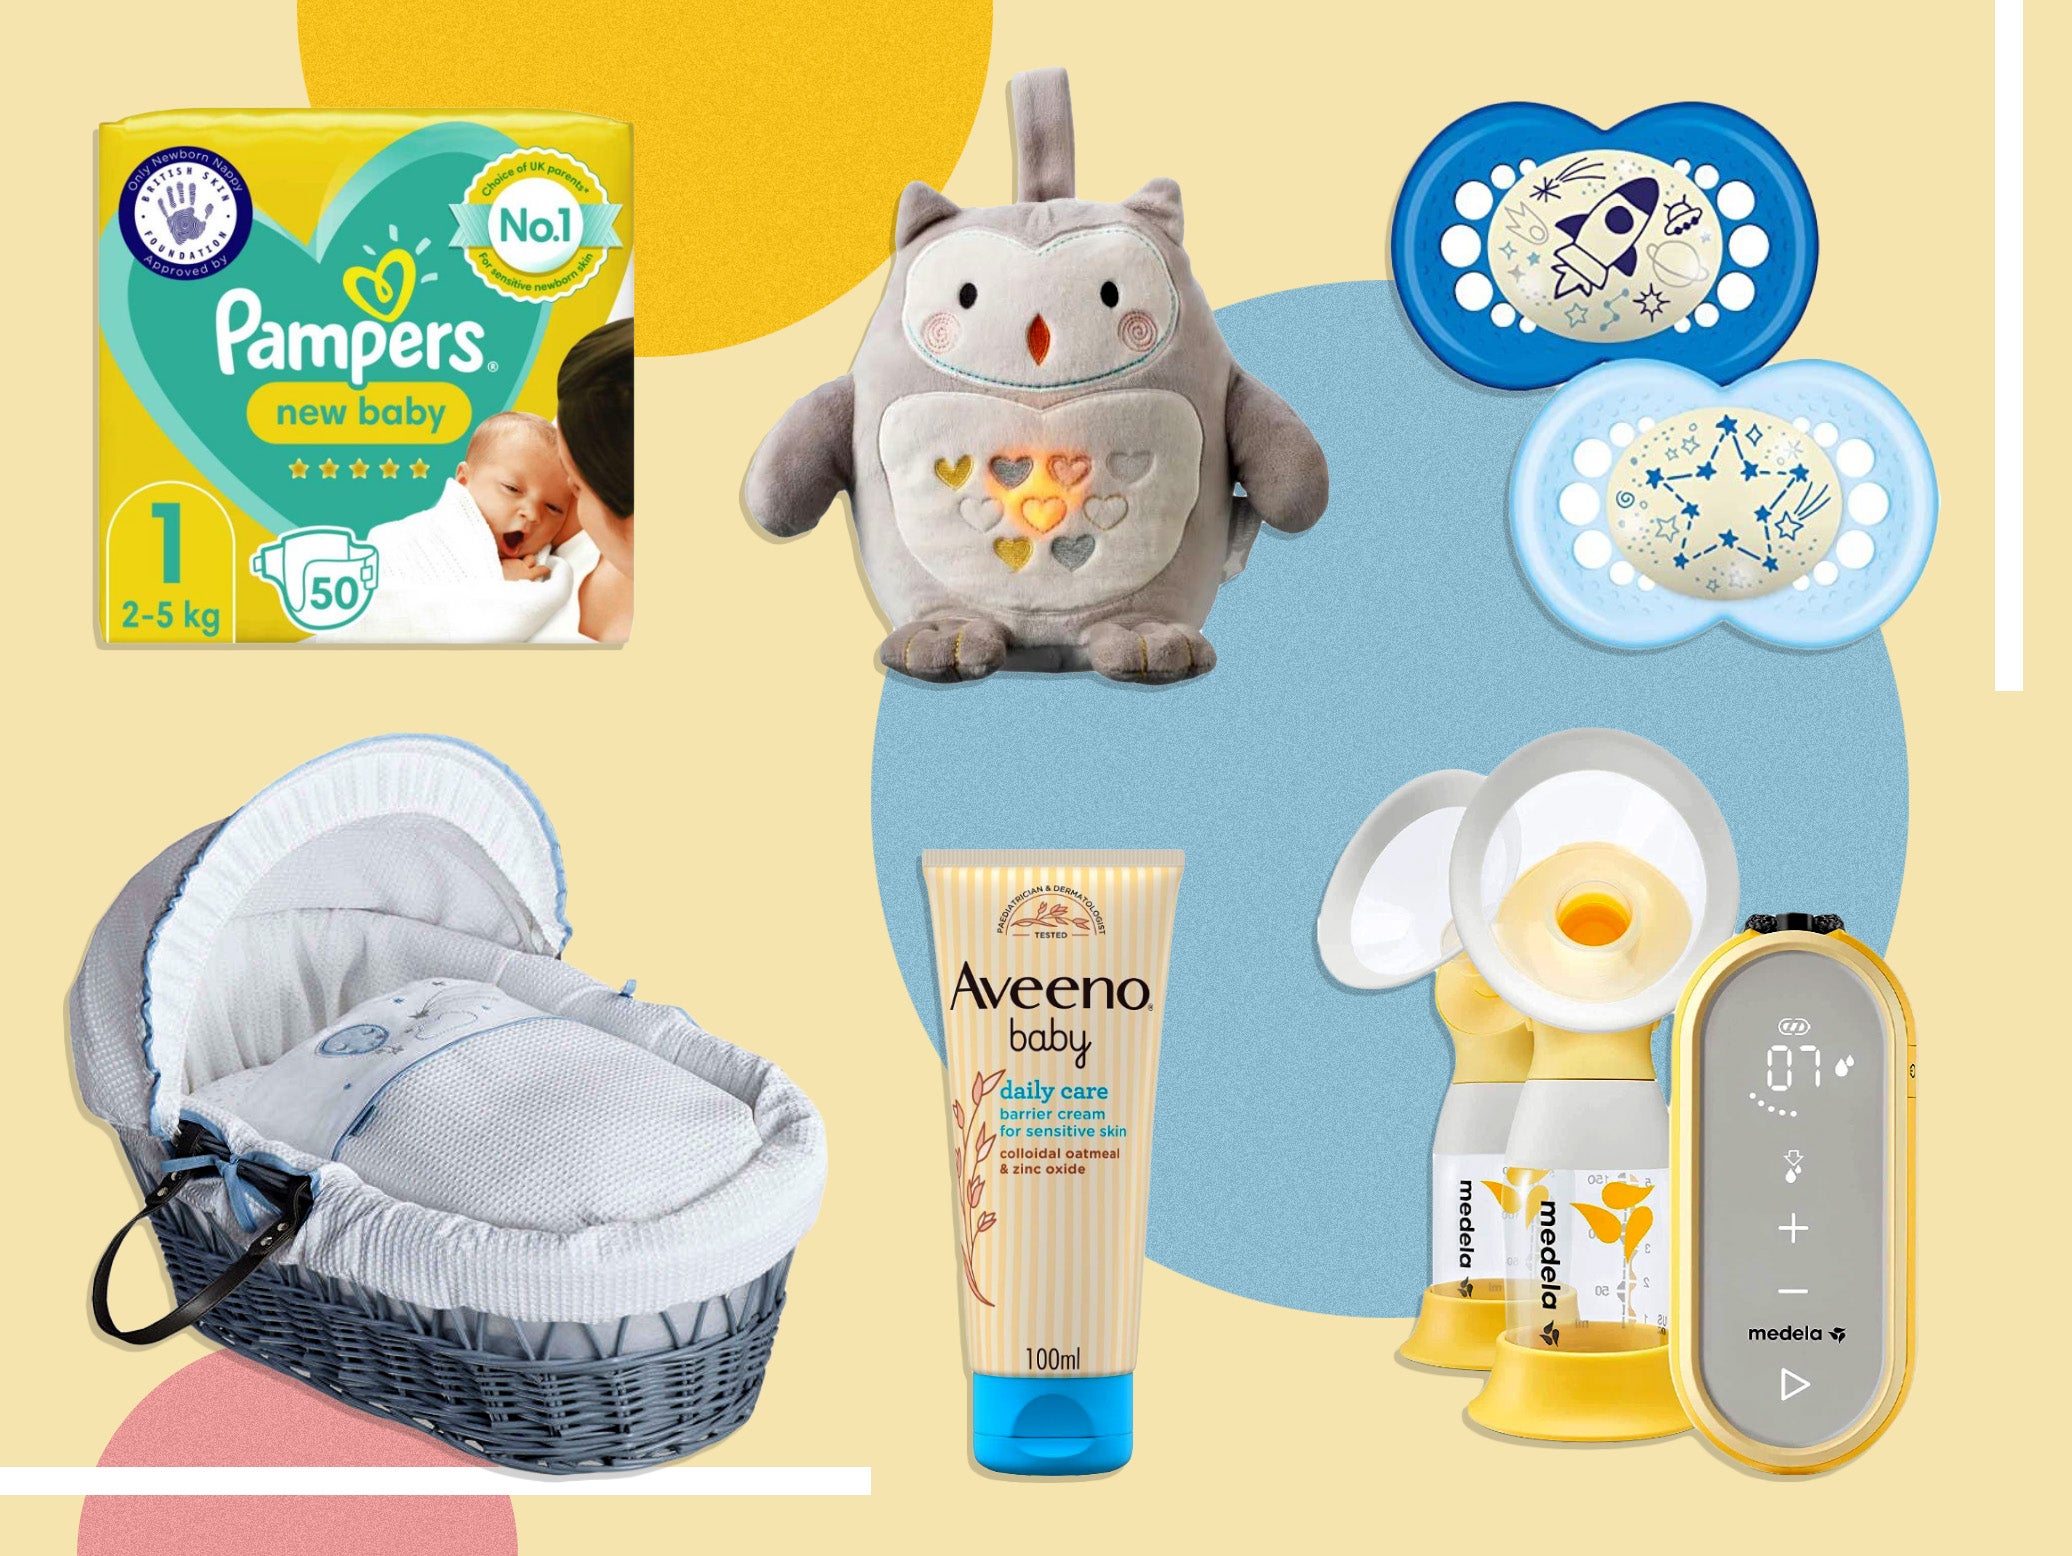 The popular sale has everything parents need for their little ones